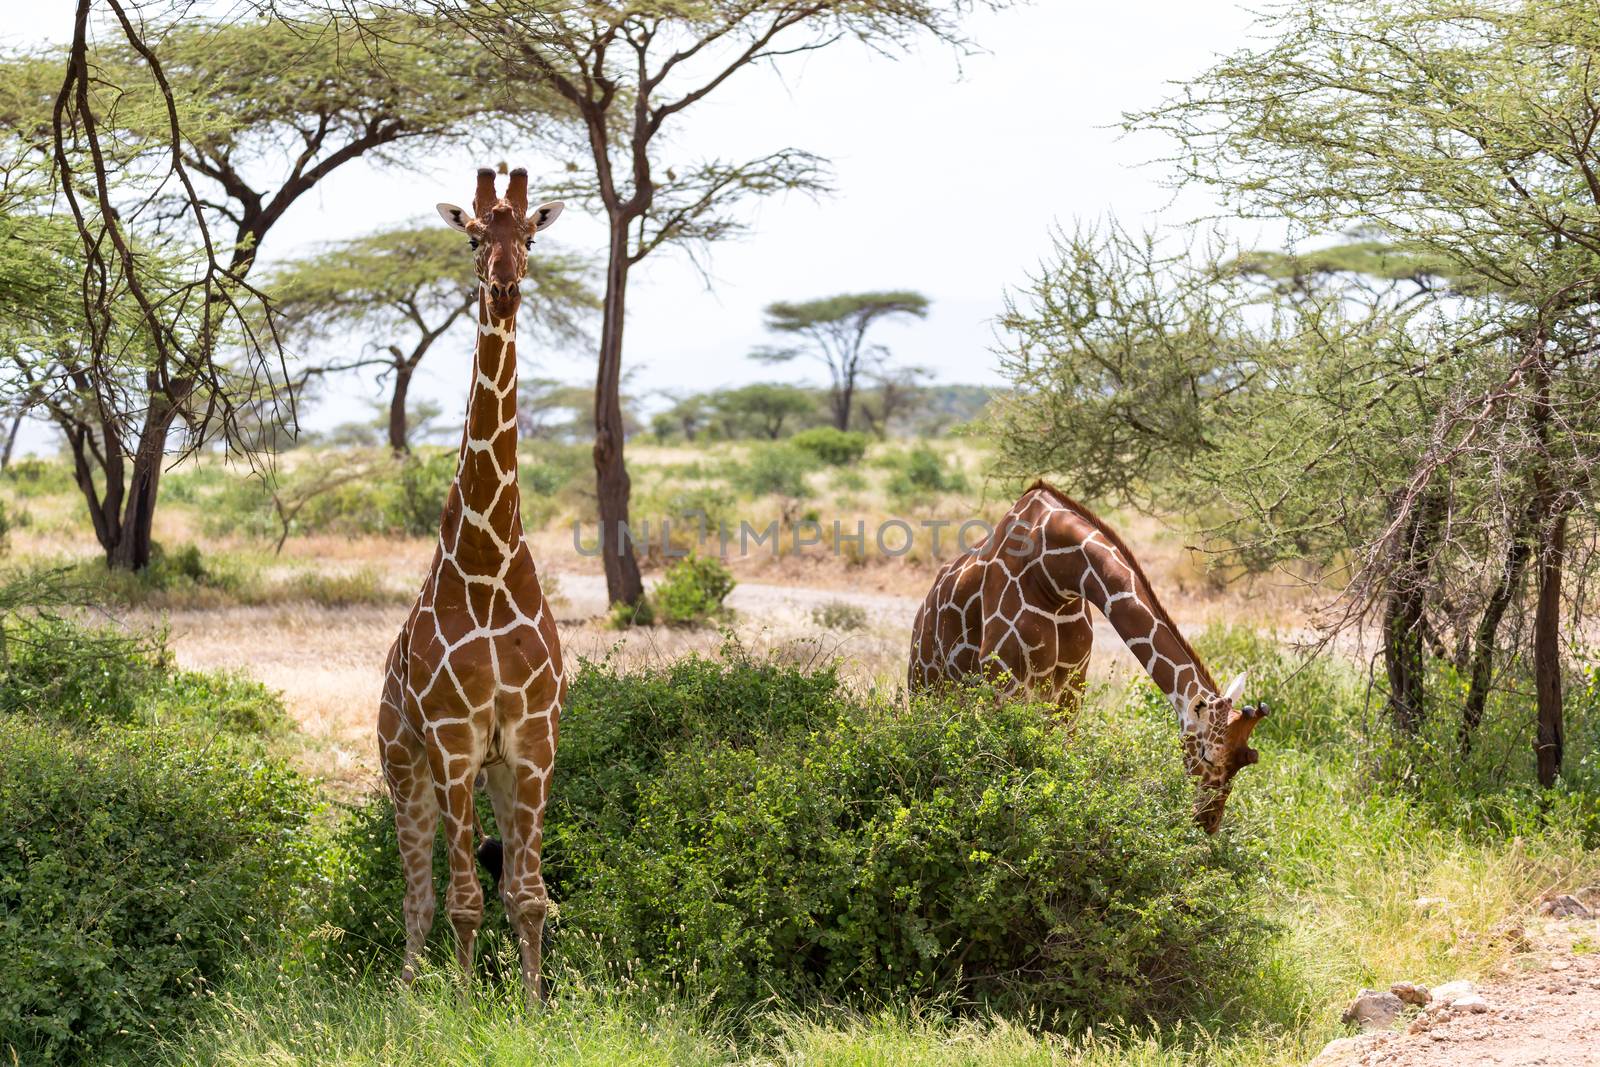 The giraffe group eats the leaves of the acacia trees